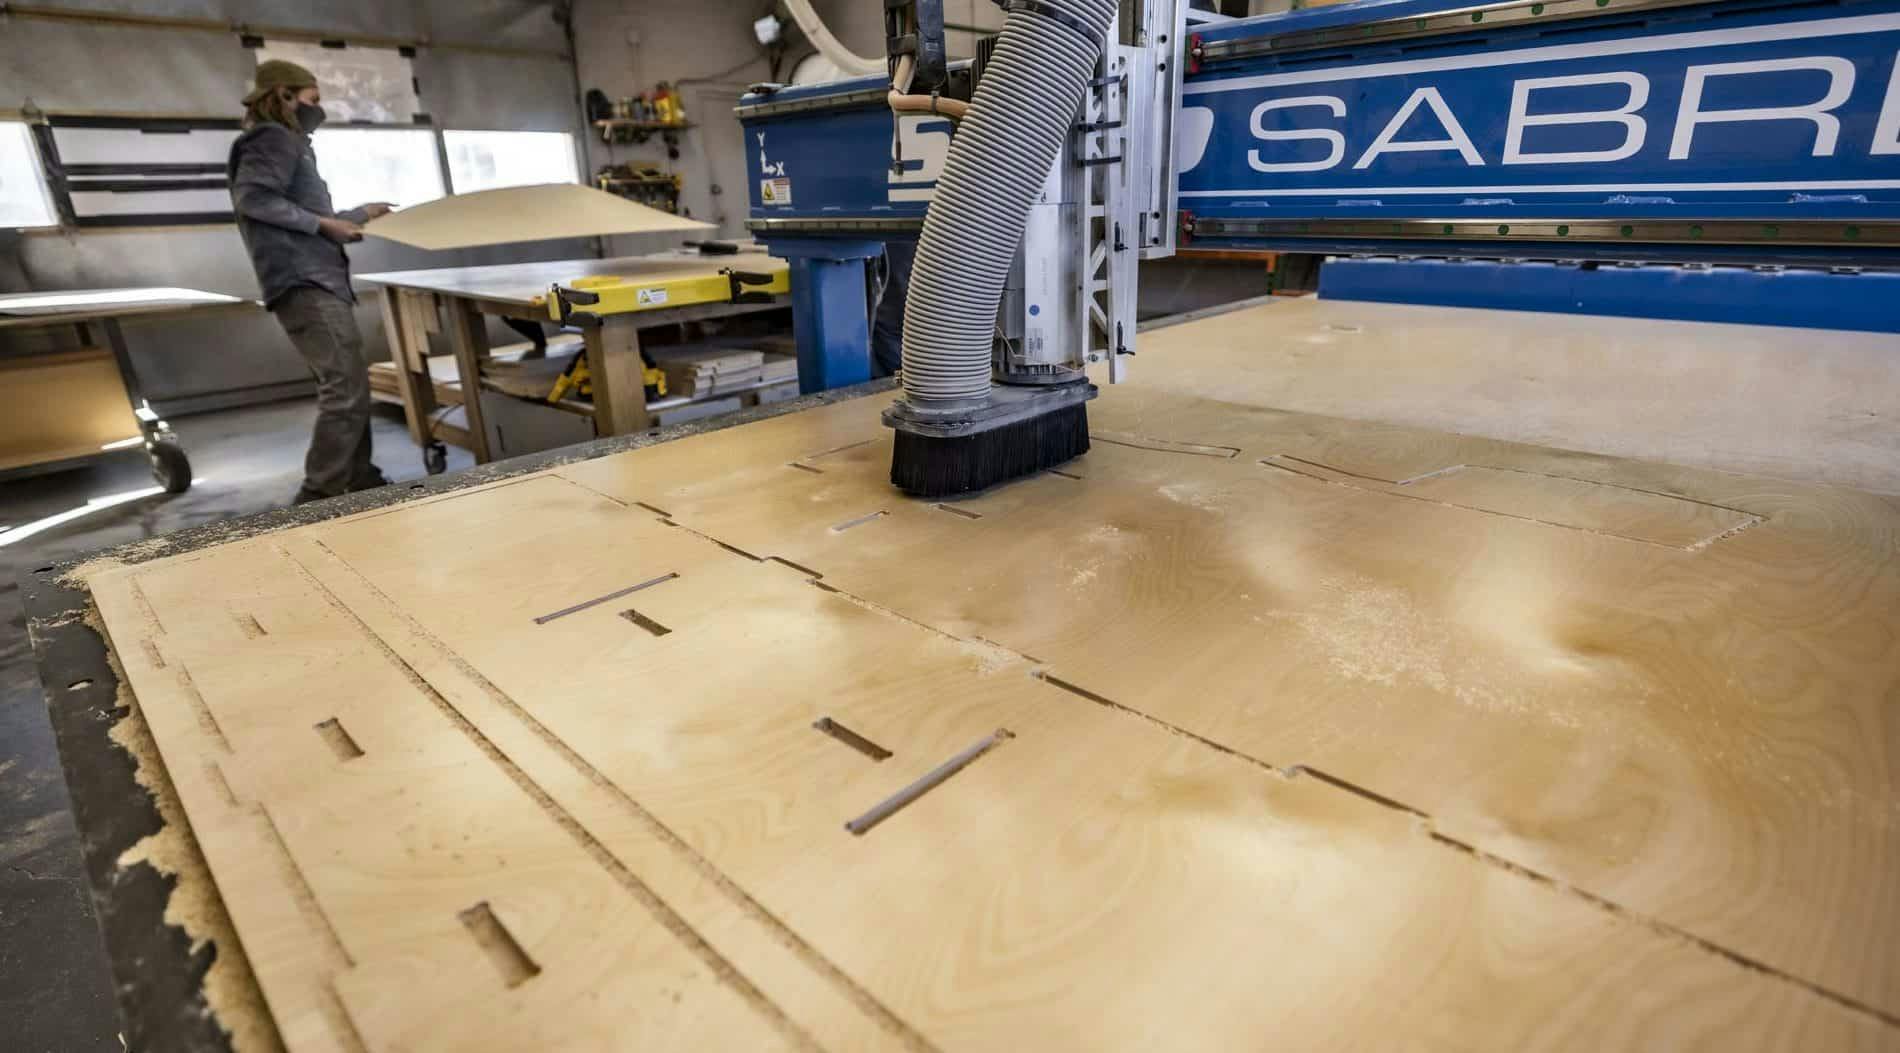 CNC Machine cutting birch cabinet structures to be used to build teardrop trailers.